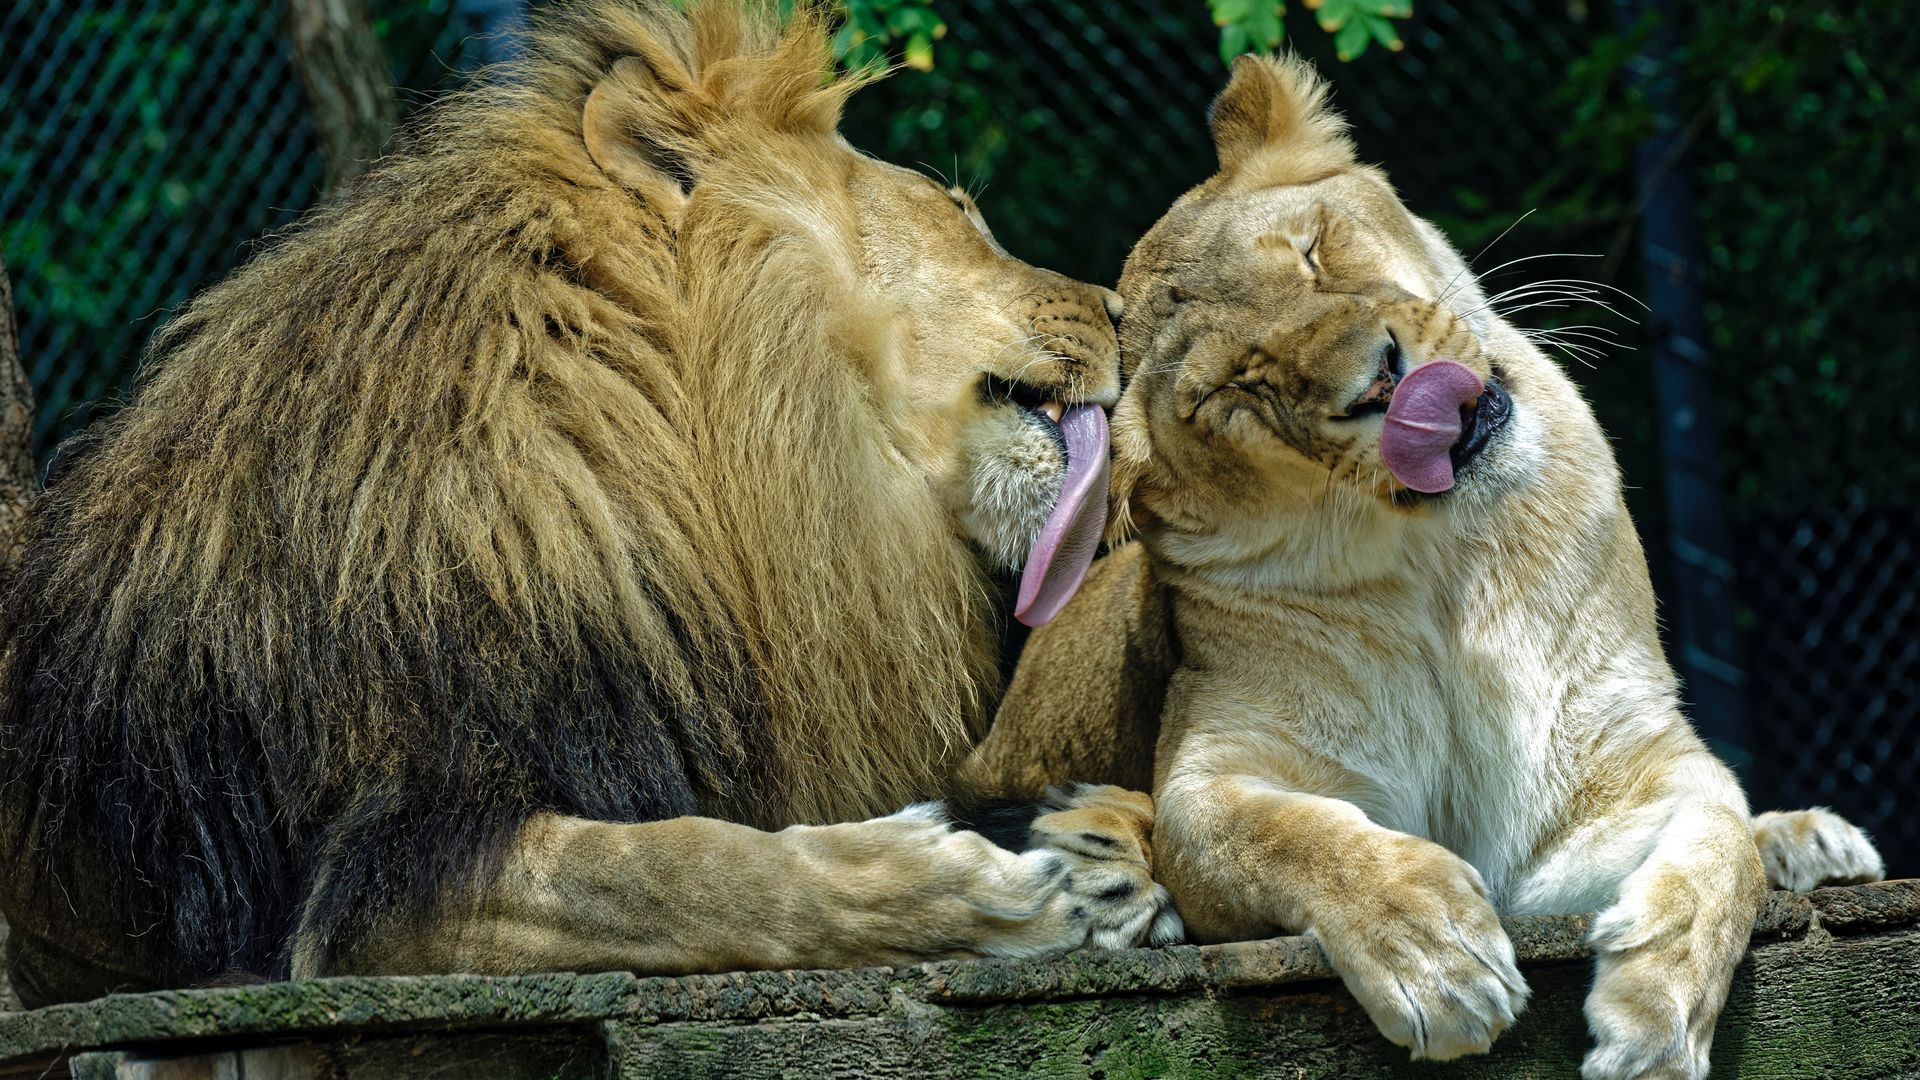 Lions Love Grooming Each Other